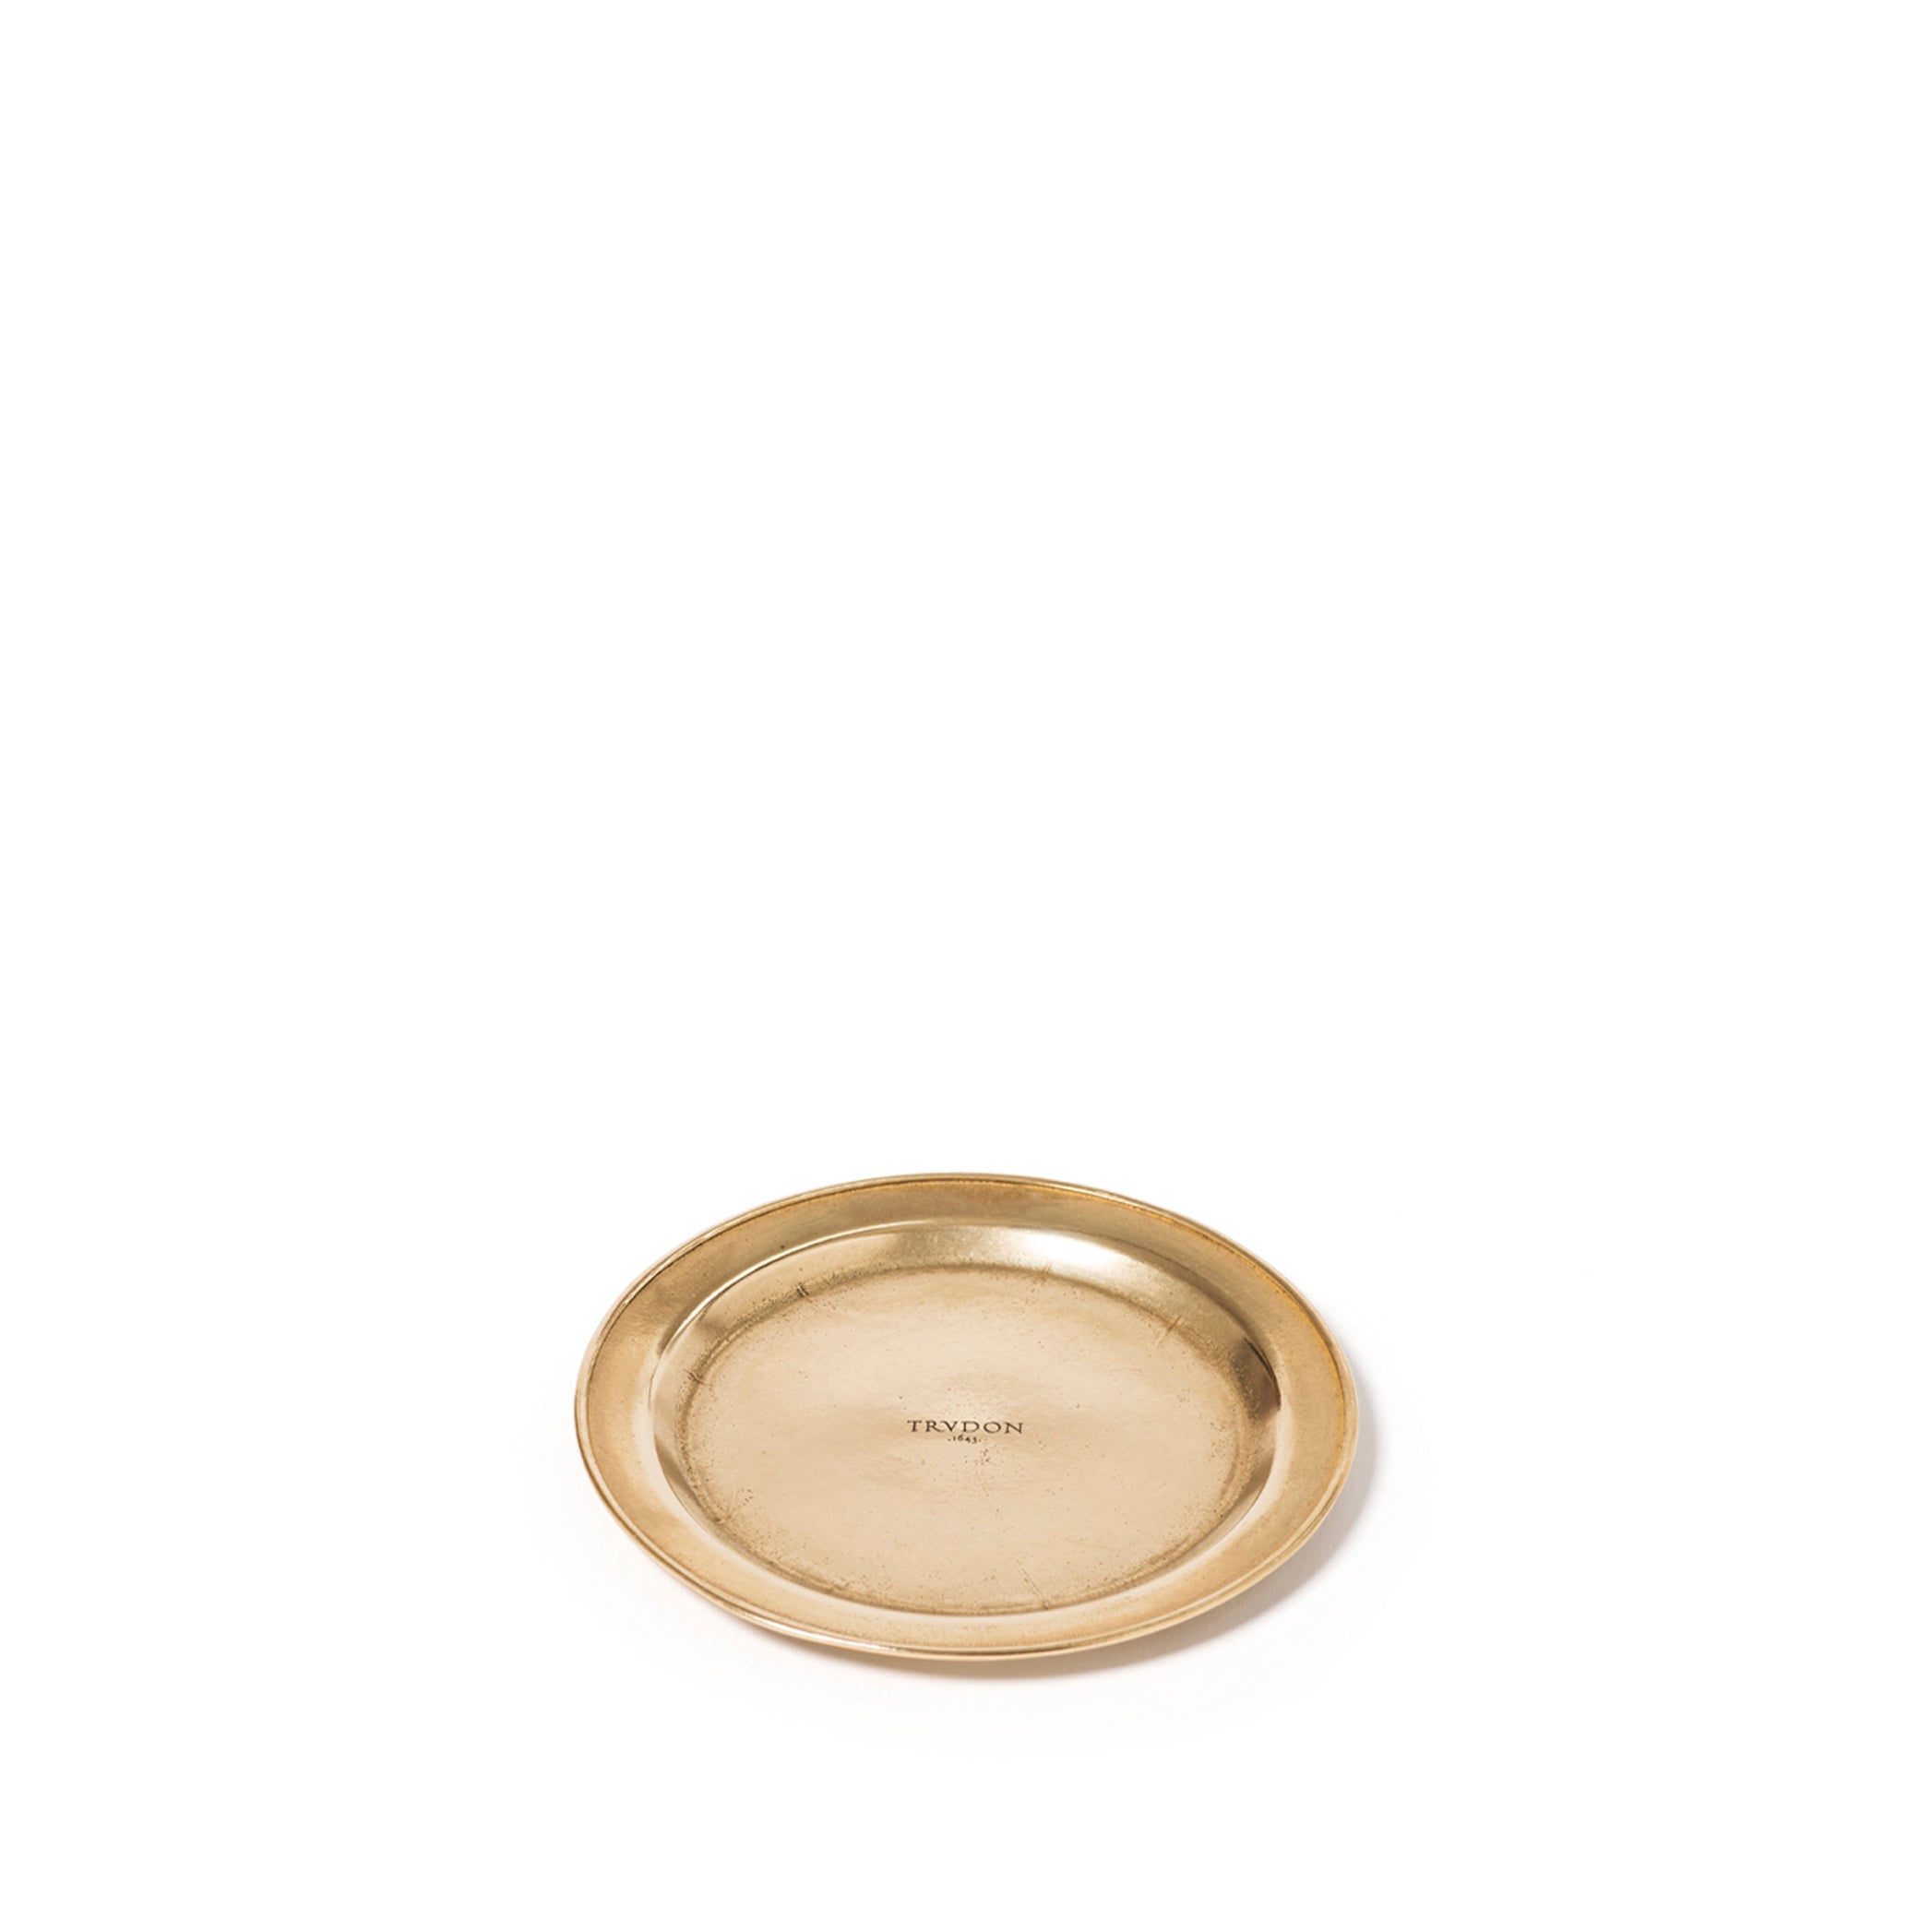 Classic Base for Pillar Candles in Gold Brass, 11cm by Trudon